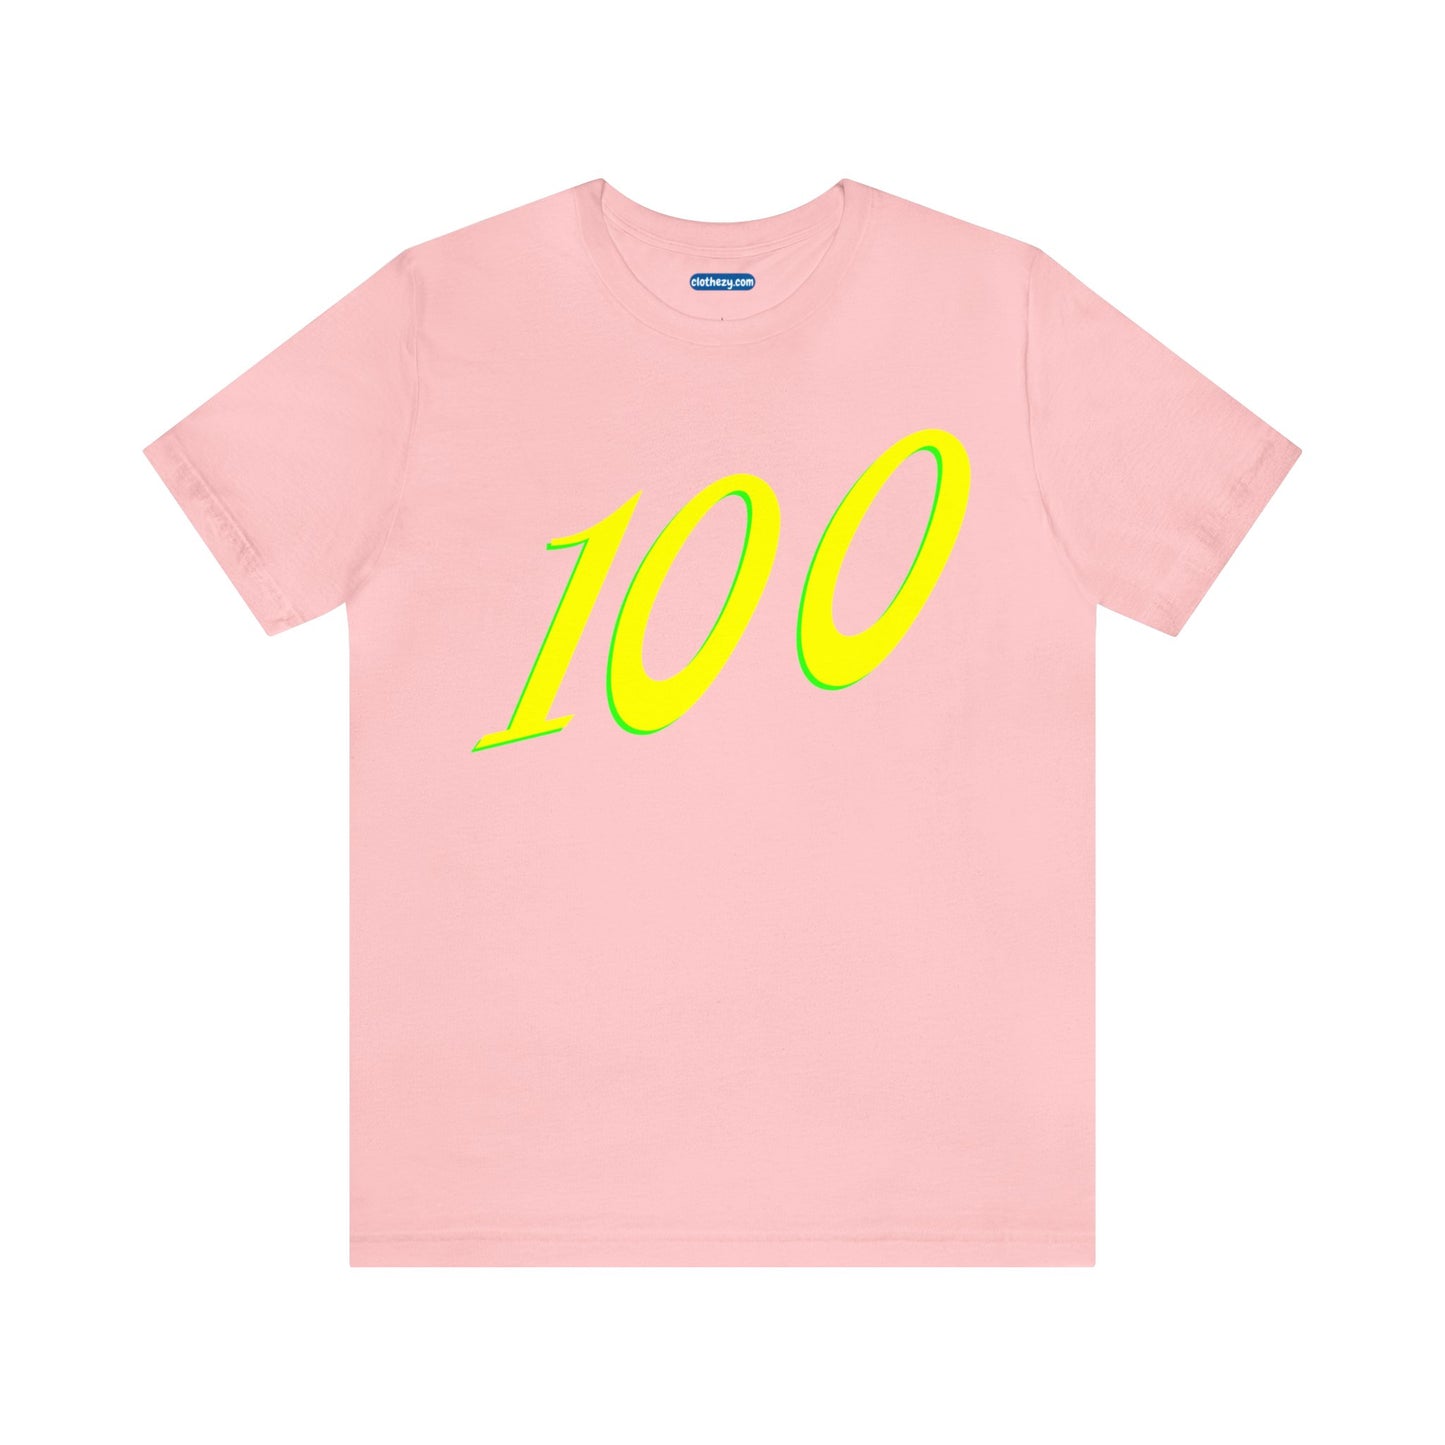 Number 100 Design - Soft Cotton Tee for birthdays and celebrations, Gift for friends and family, Multiple Options by clothezy.com in Pink Size Small - Buy Now